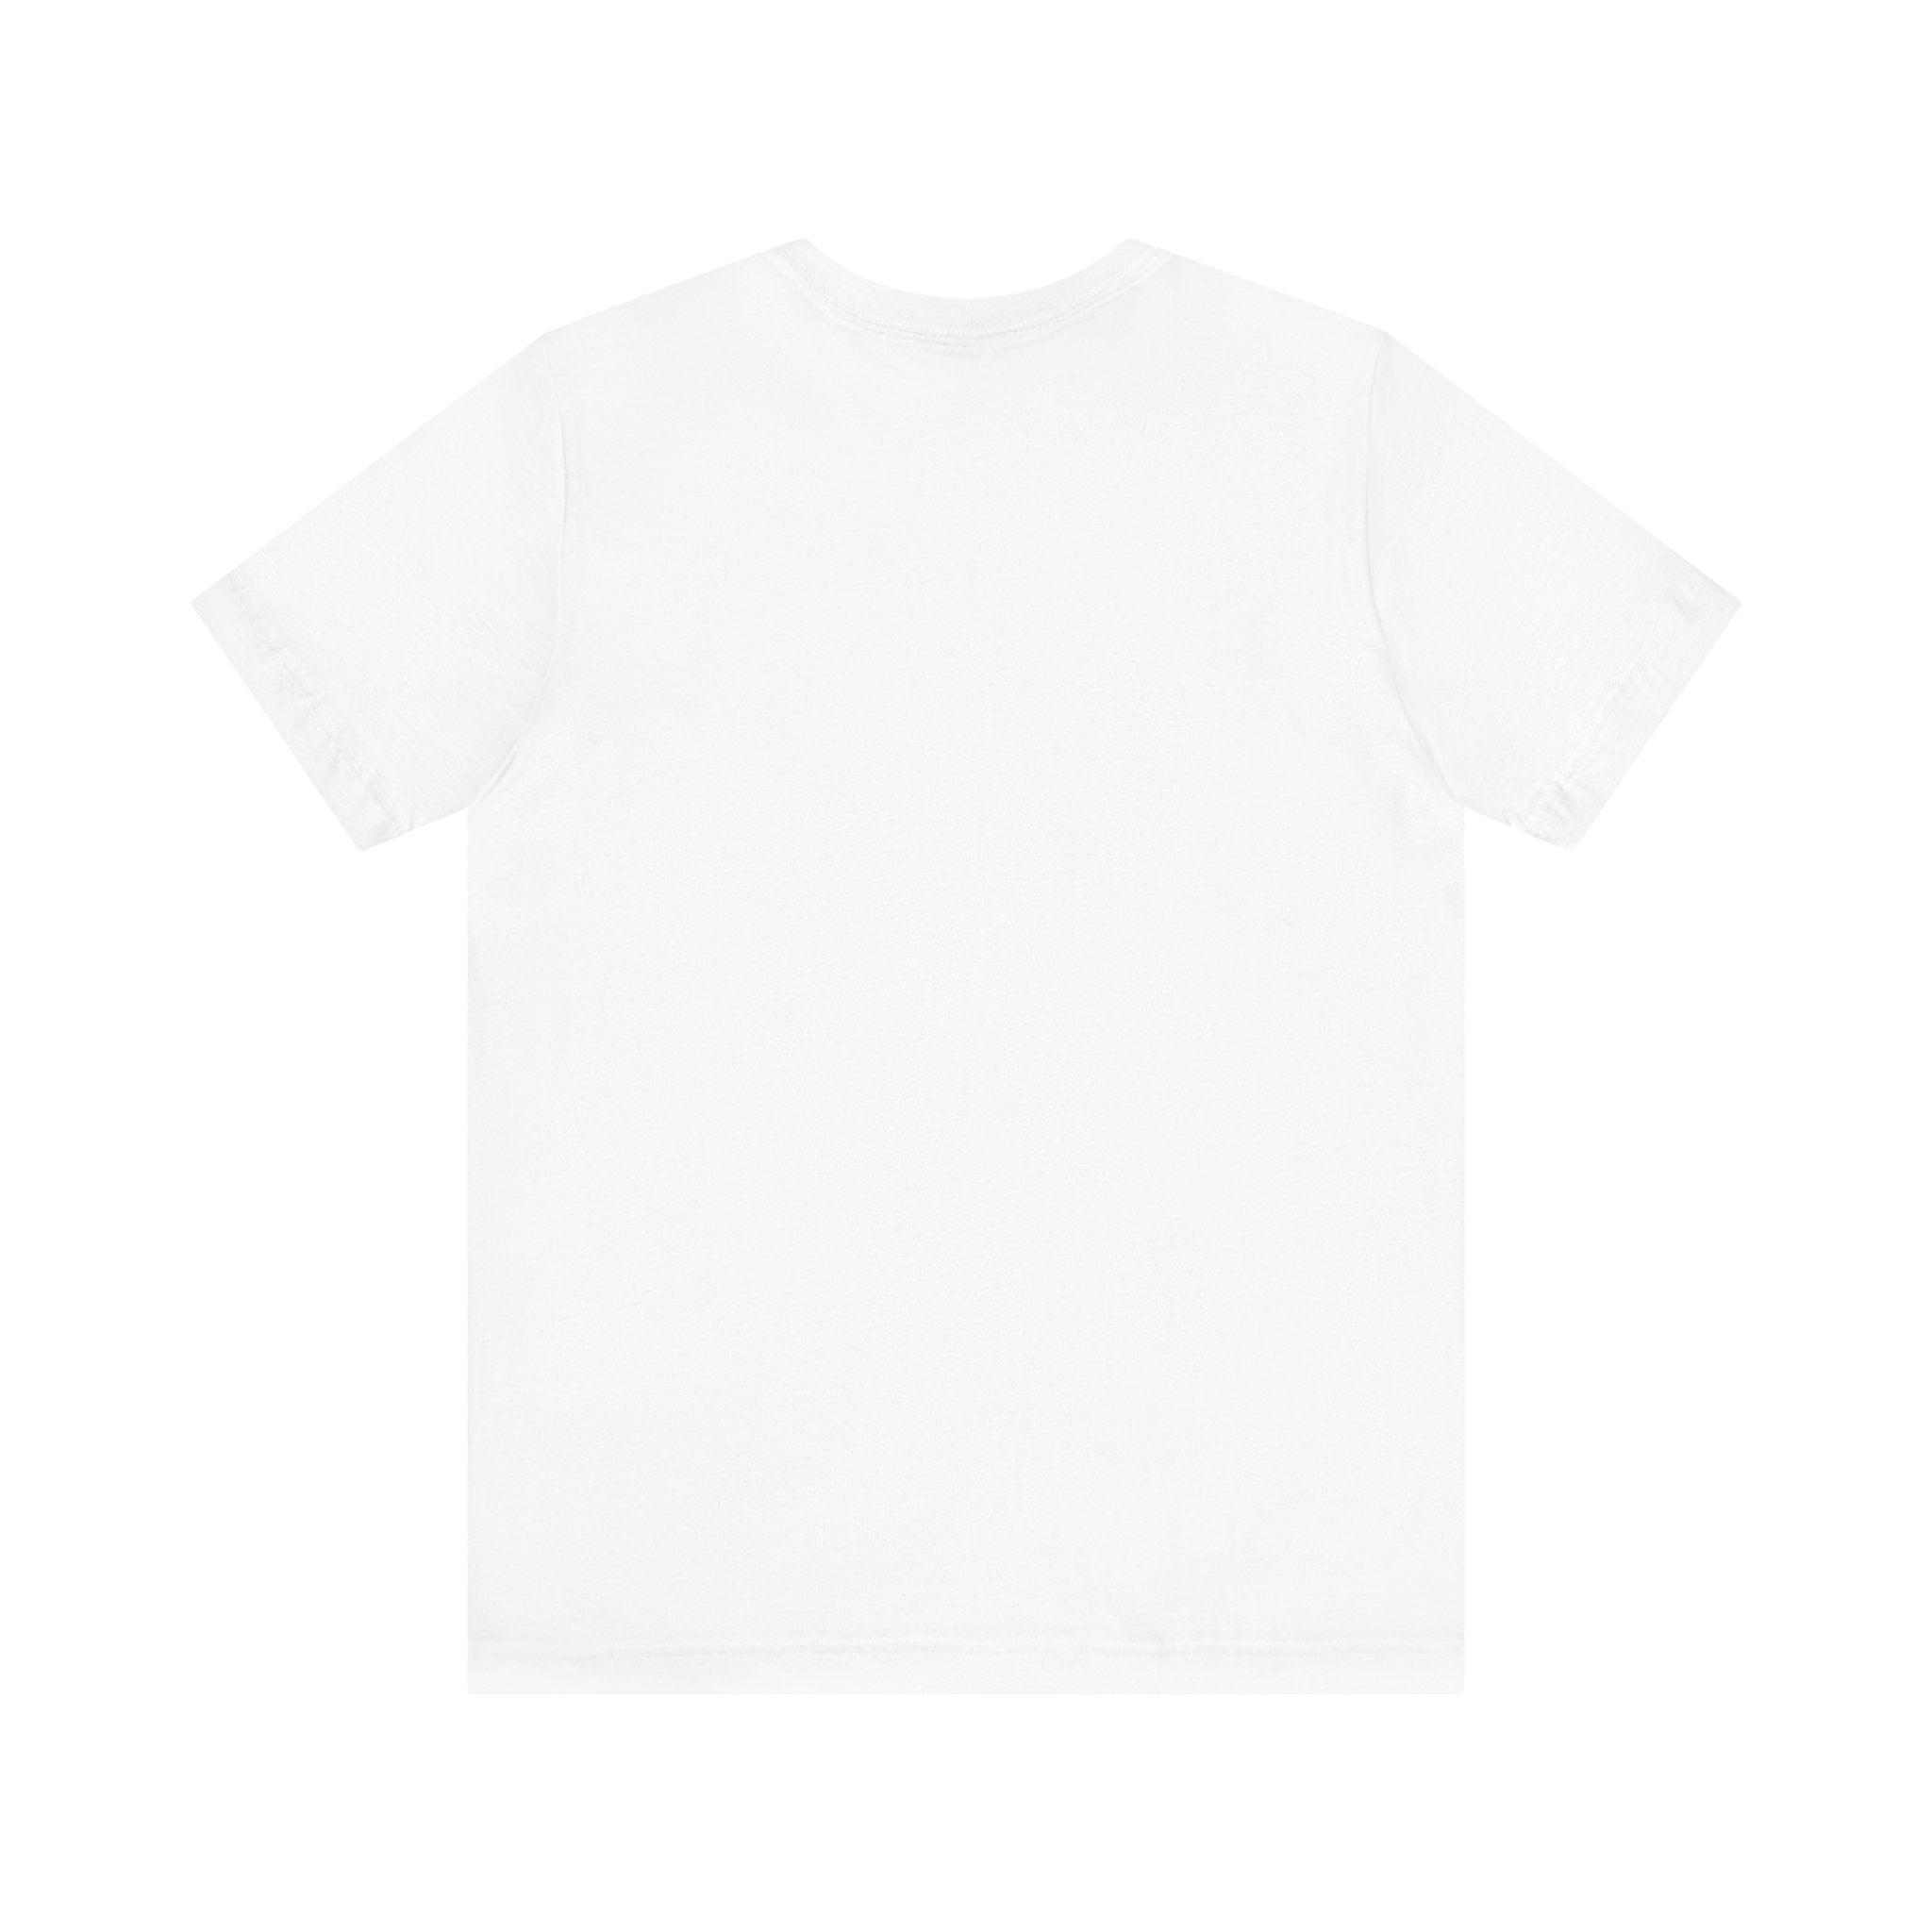 Funcle T-Shirt displayed against a white background.